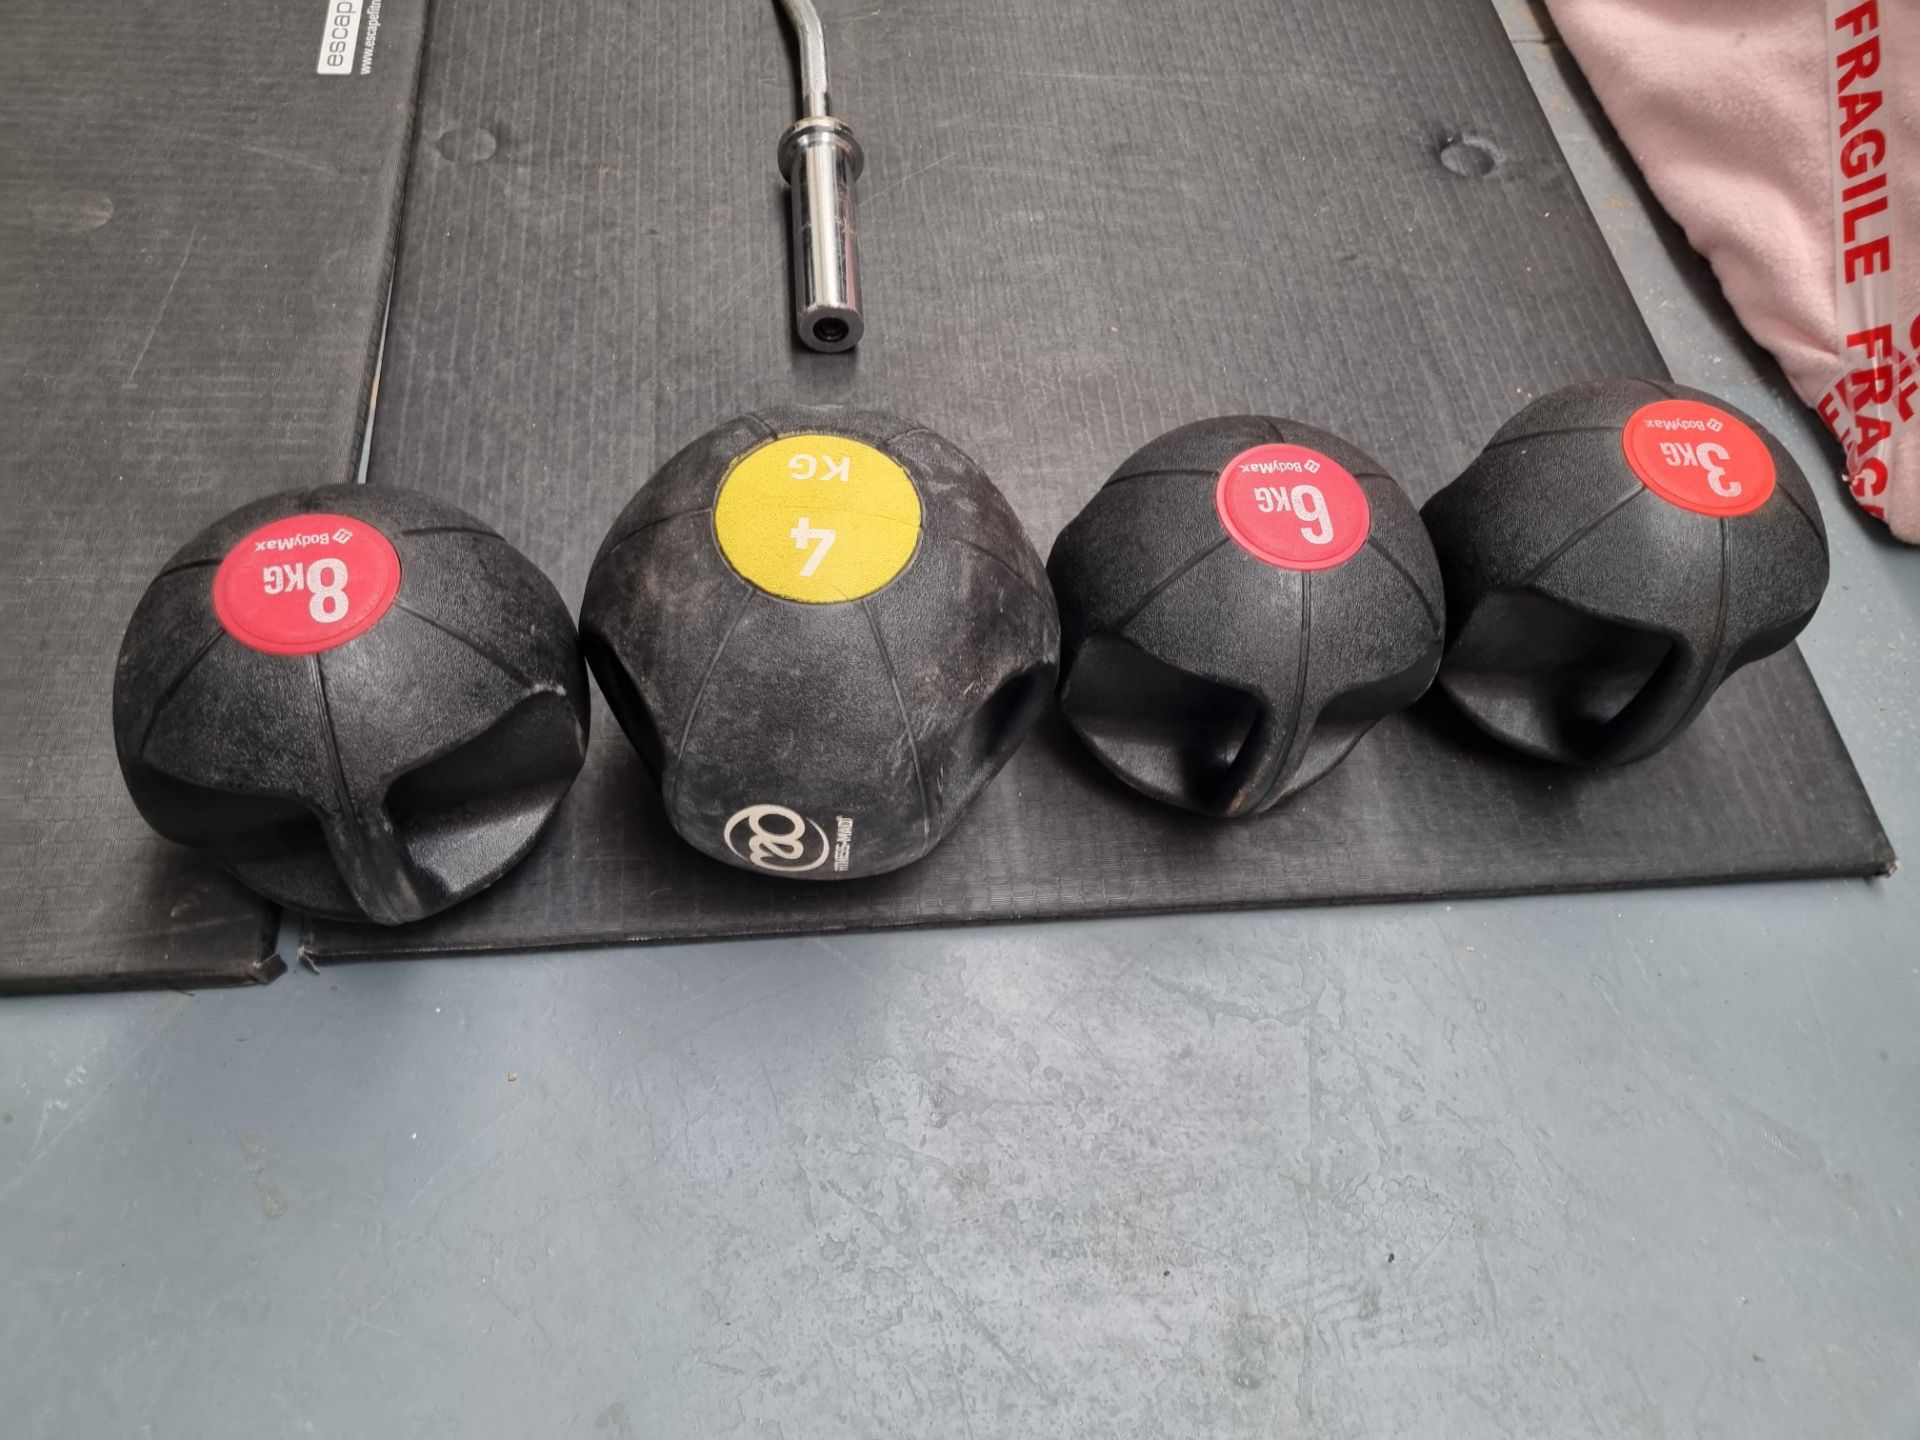 A set of Bodymax double handled medicine balls ranging from 3kg to 8kg set of 4